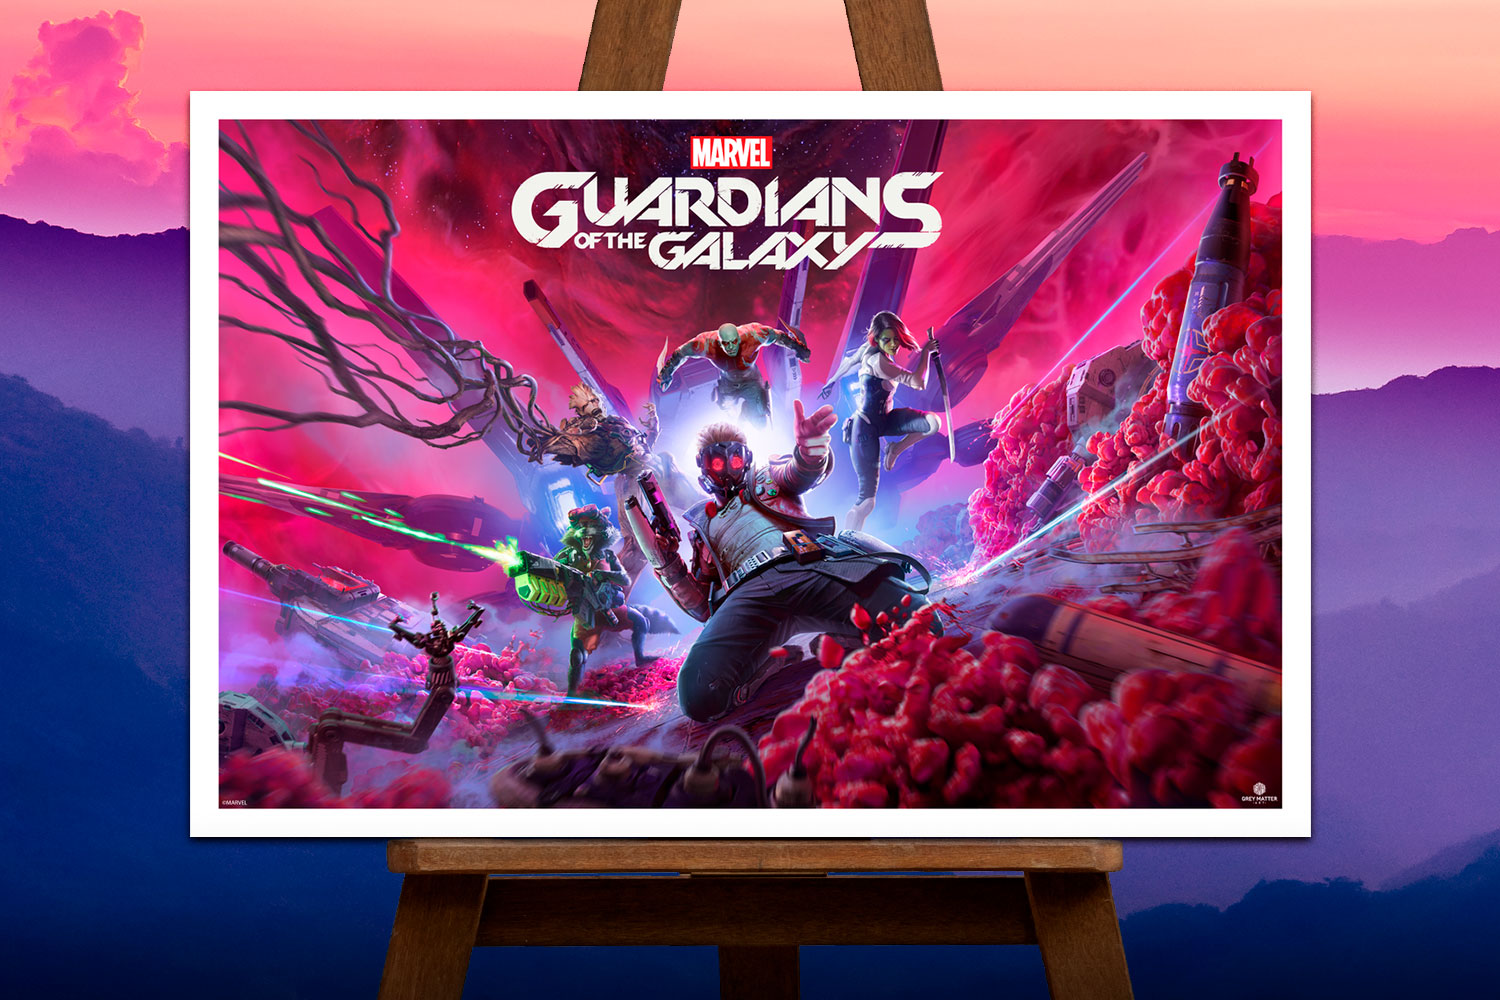 Guardians of the Galaxy (Game Art)